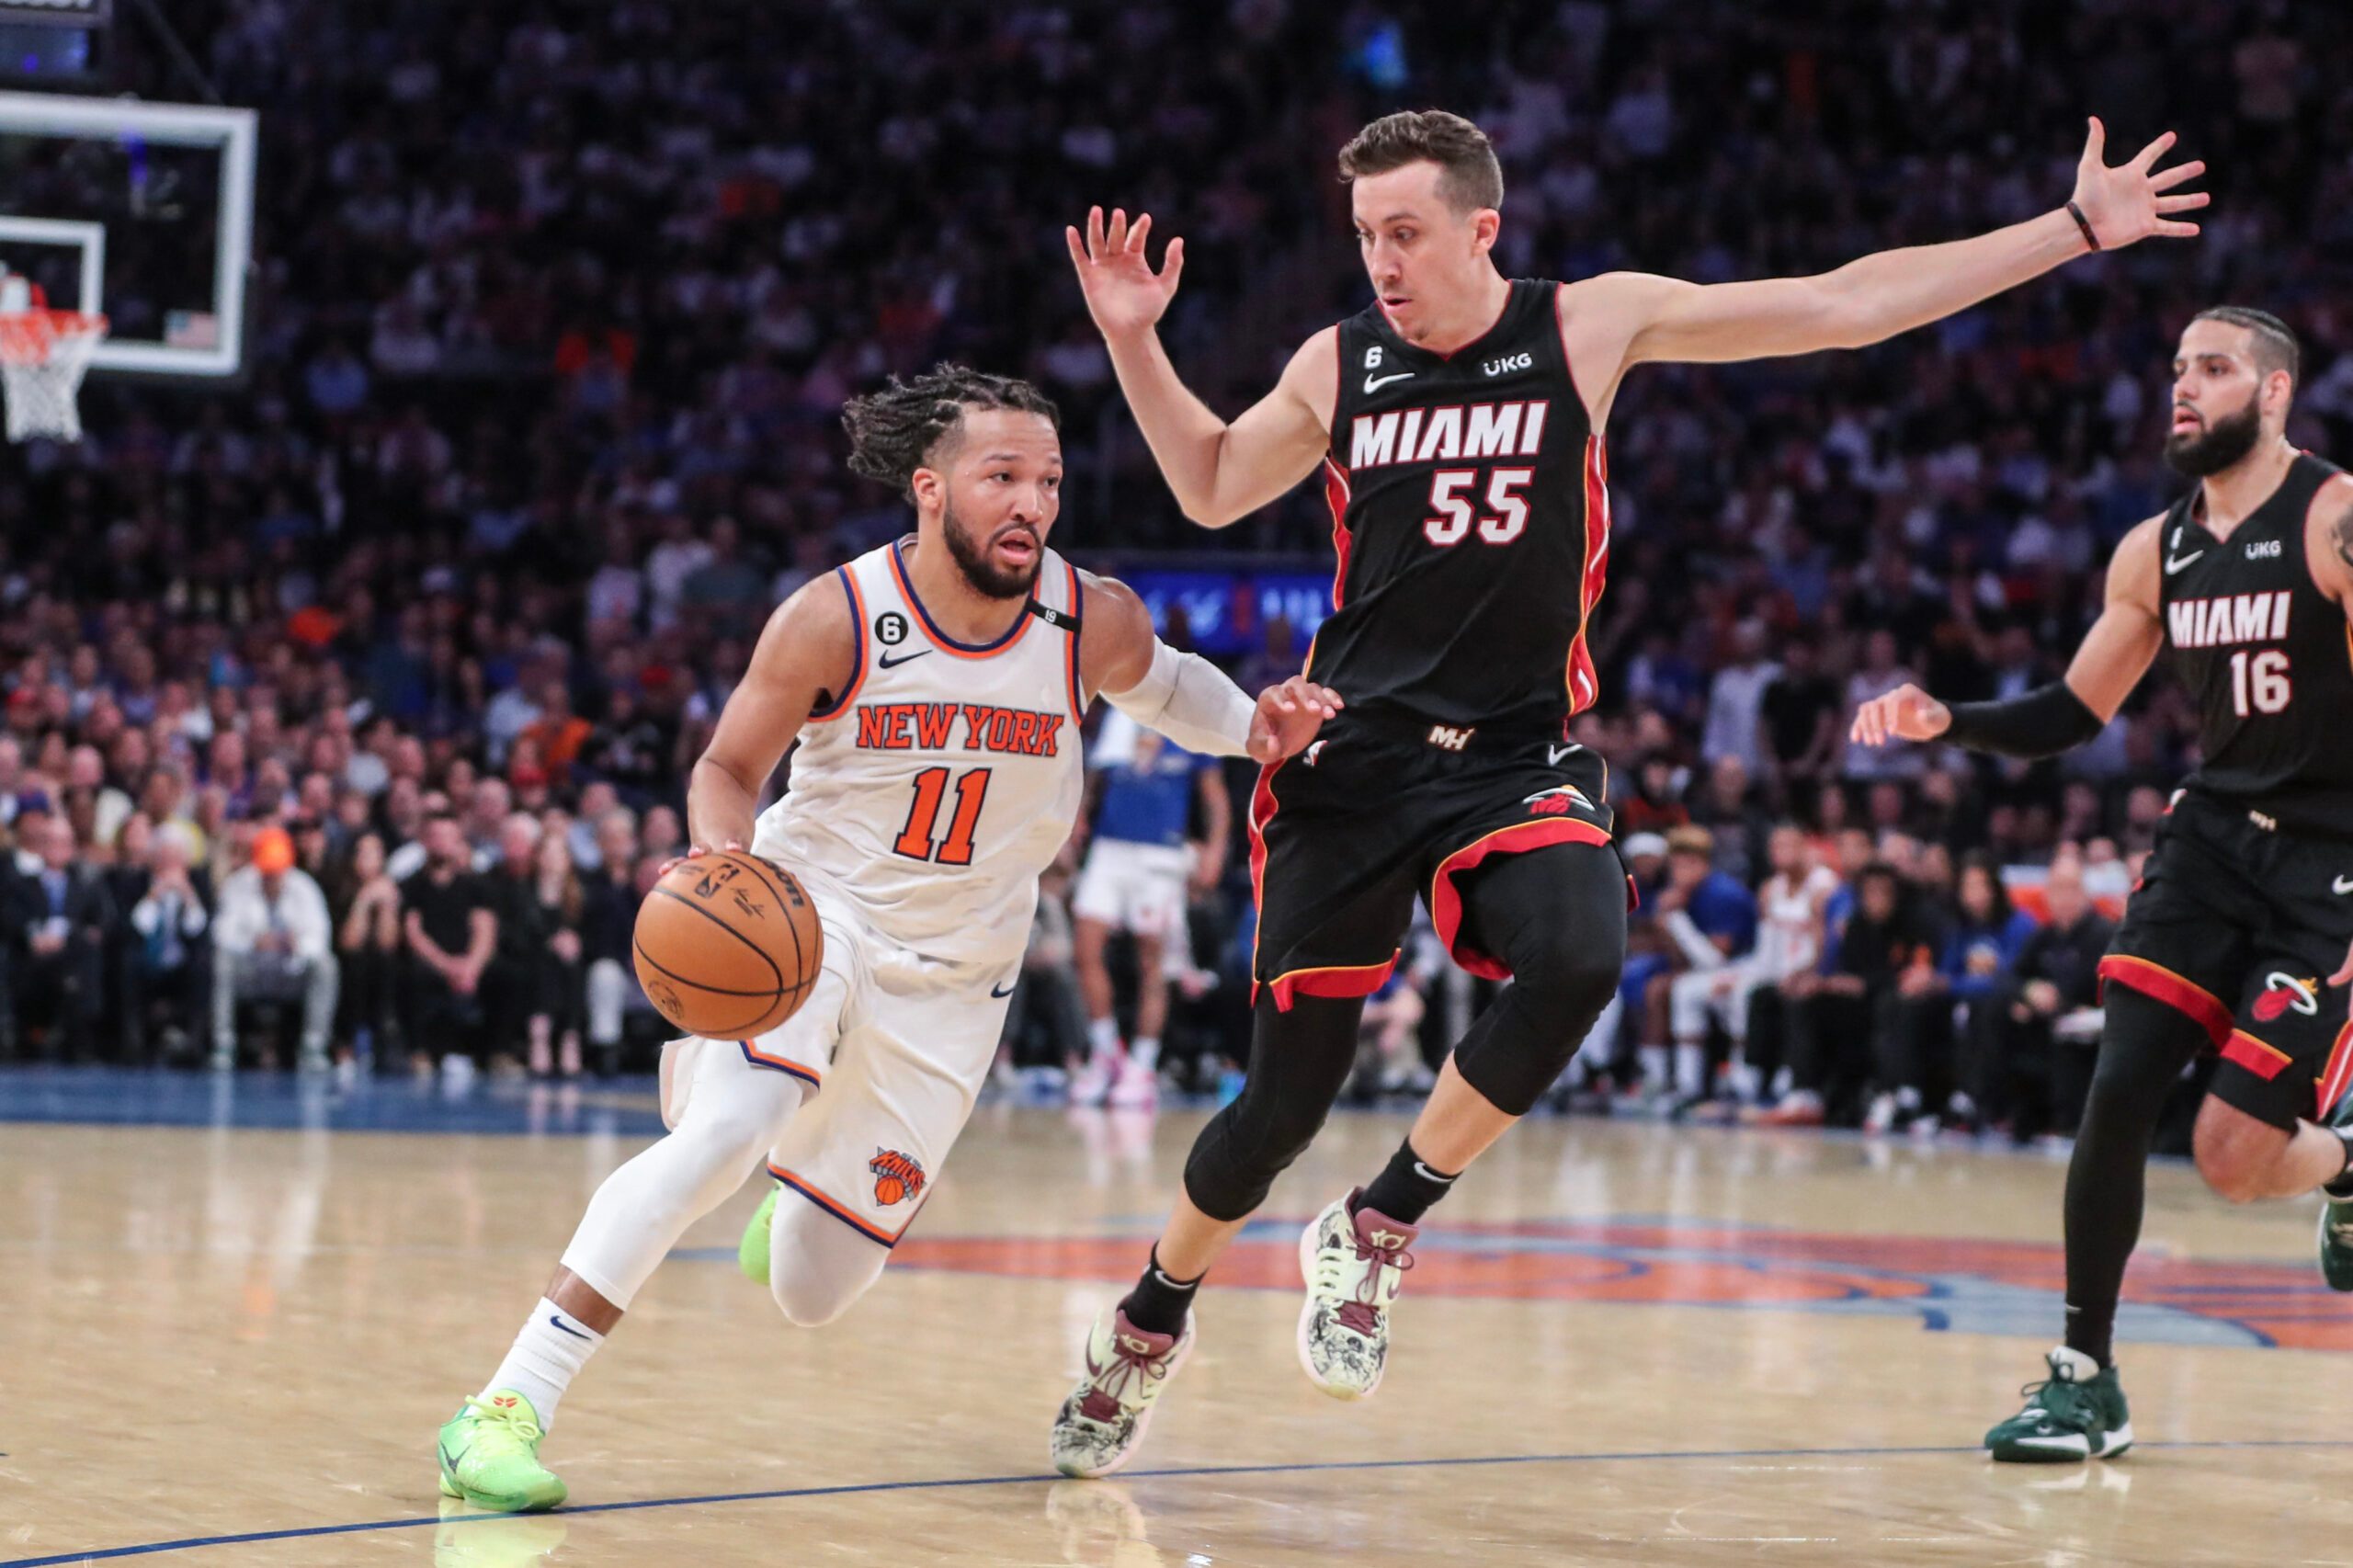 Jalen Brunson's winning ways are changing the Knicks' culture, one